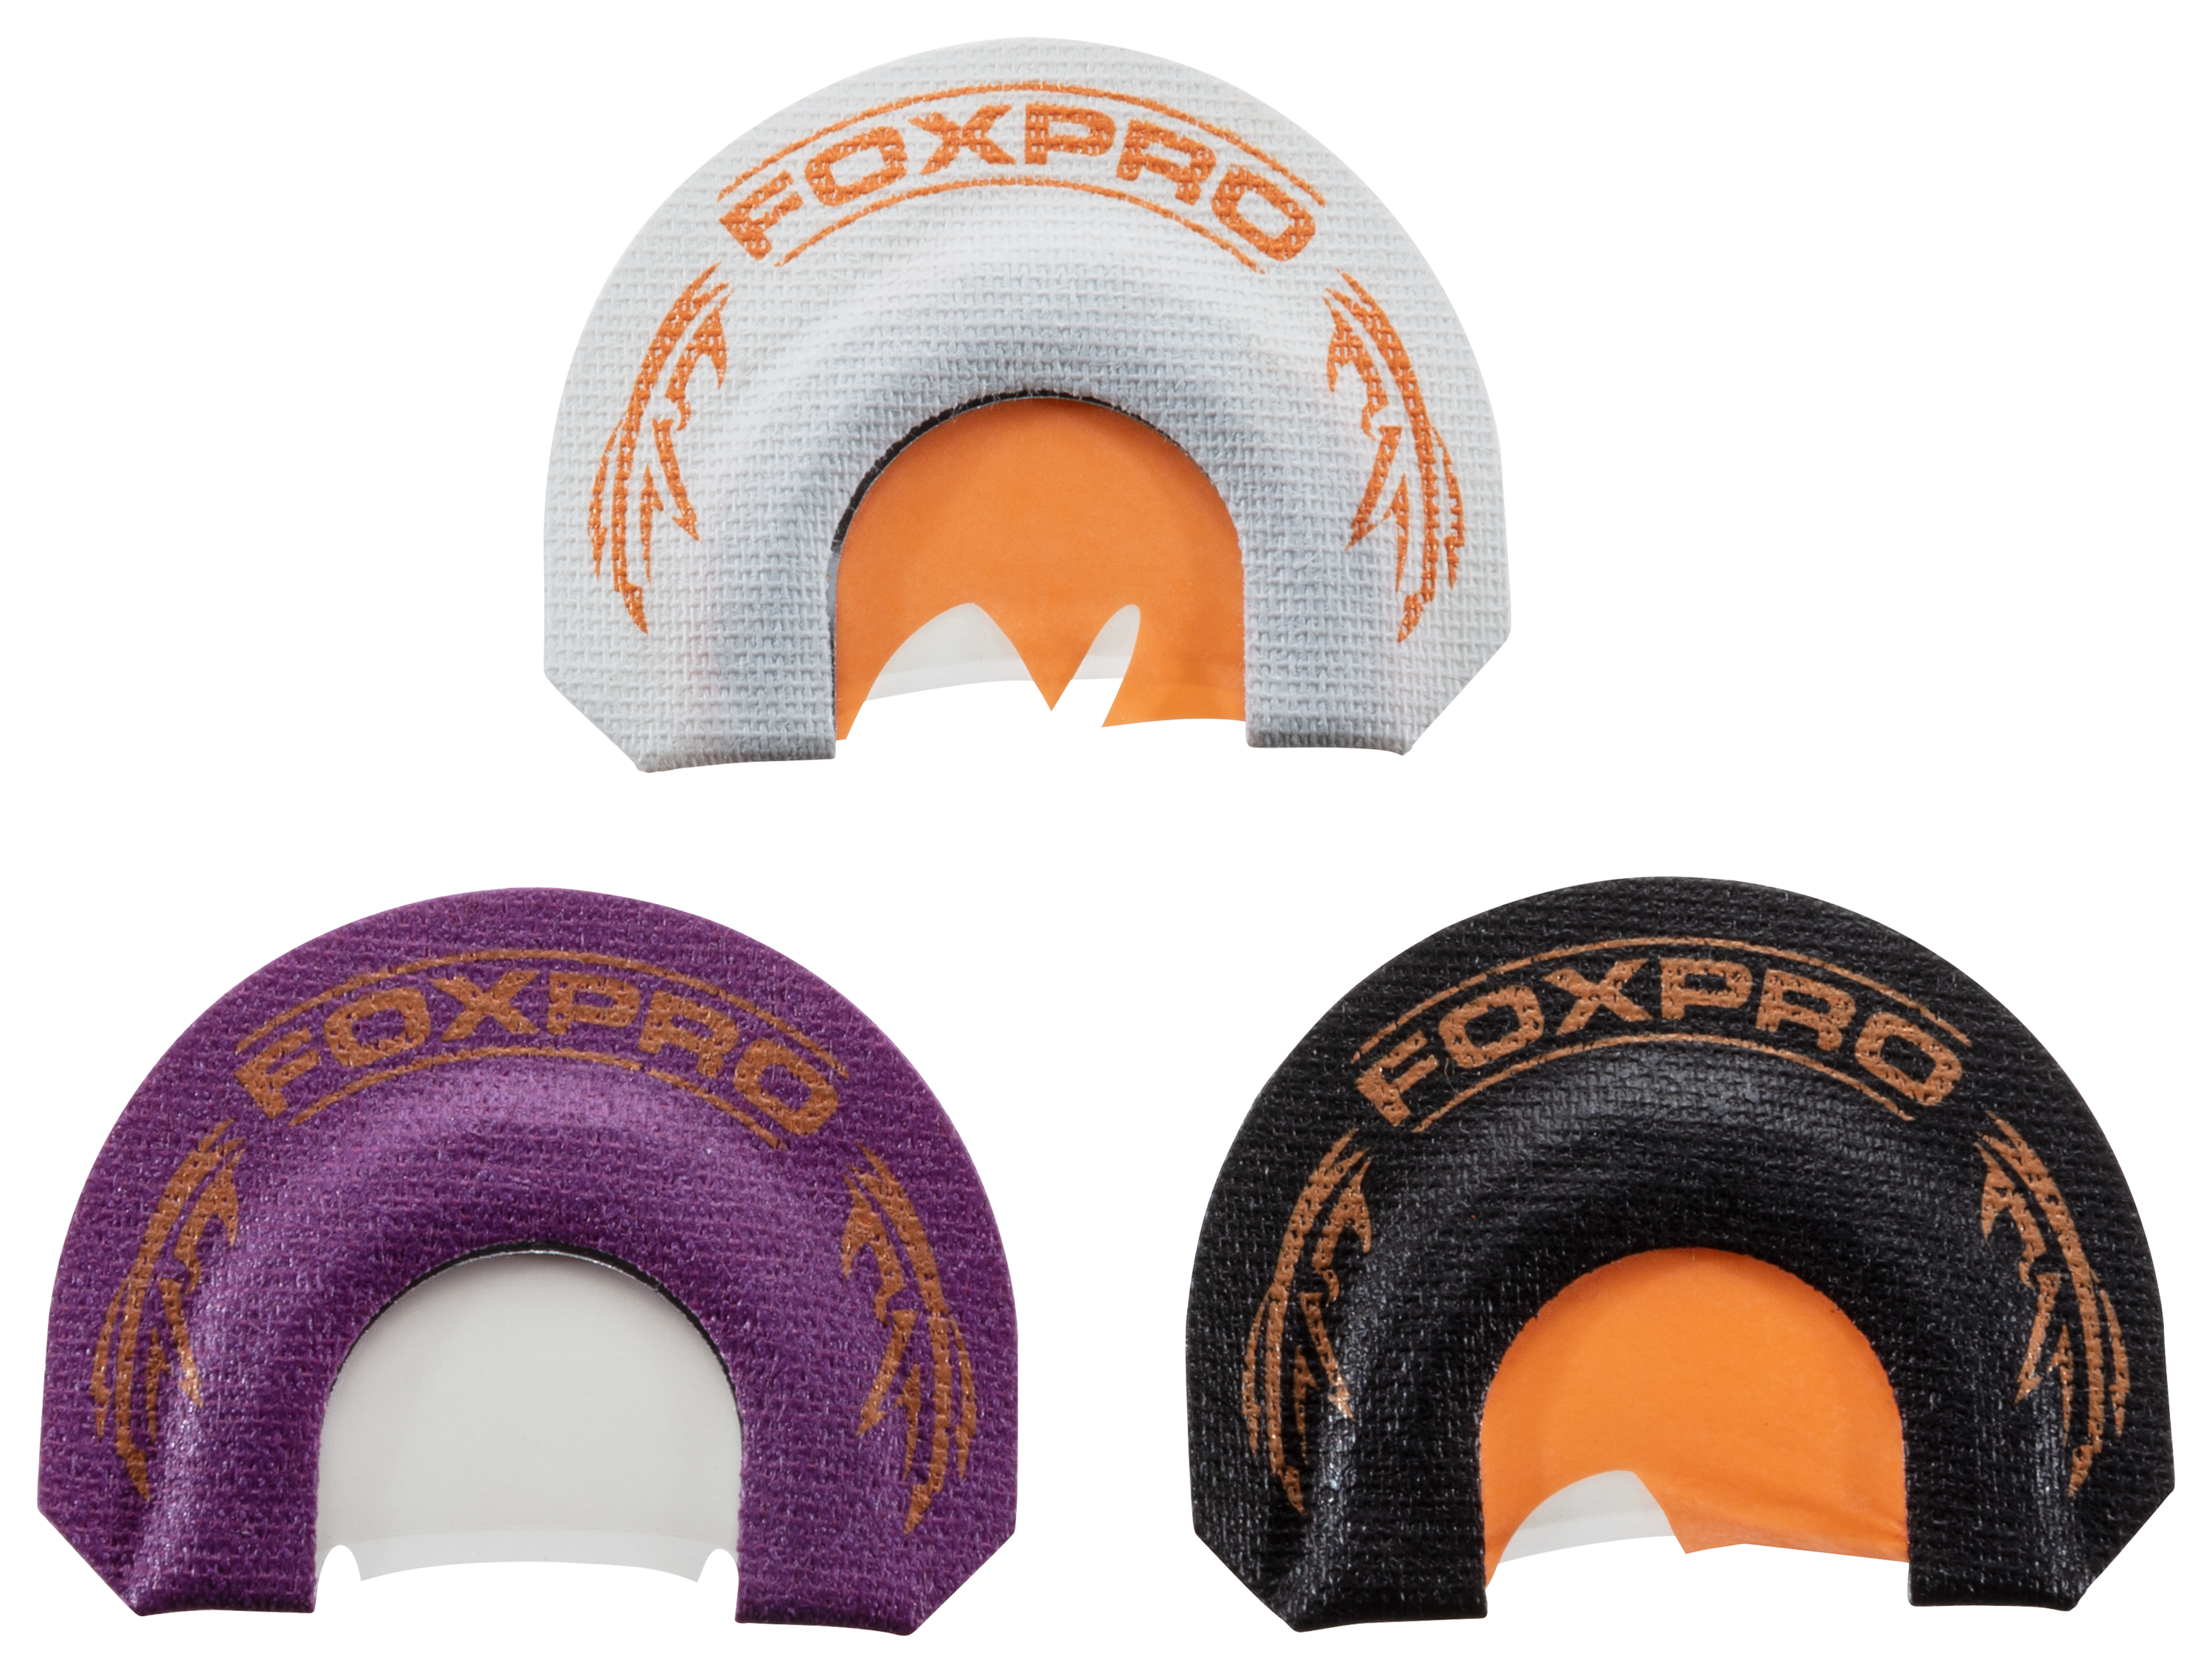 FOXPRO Hybrid Spur Mouth Turkey Call Combo